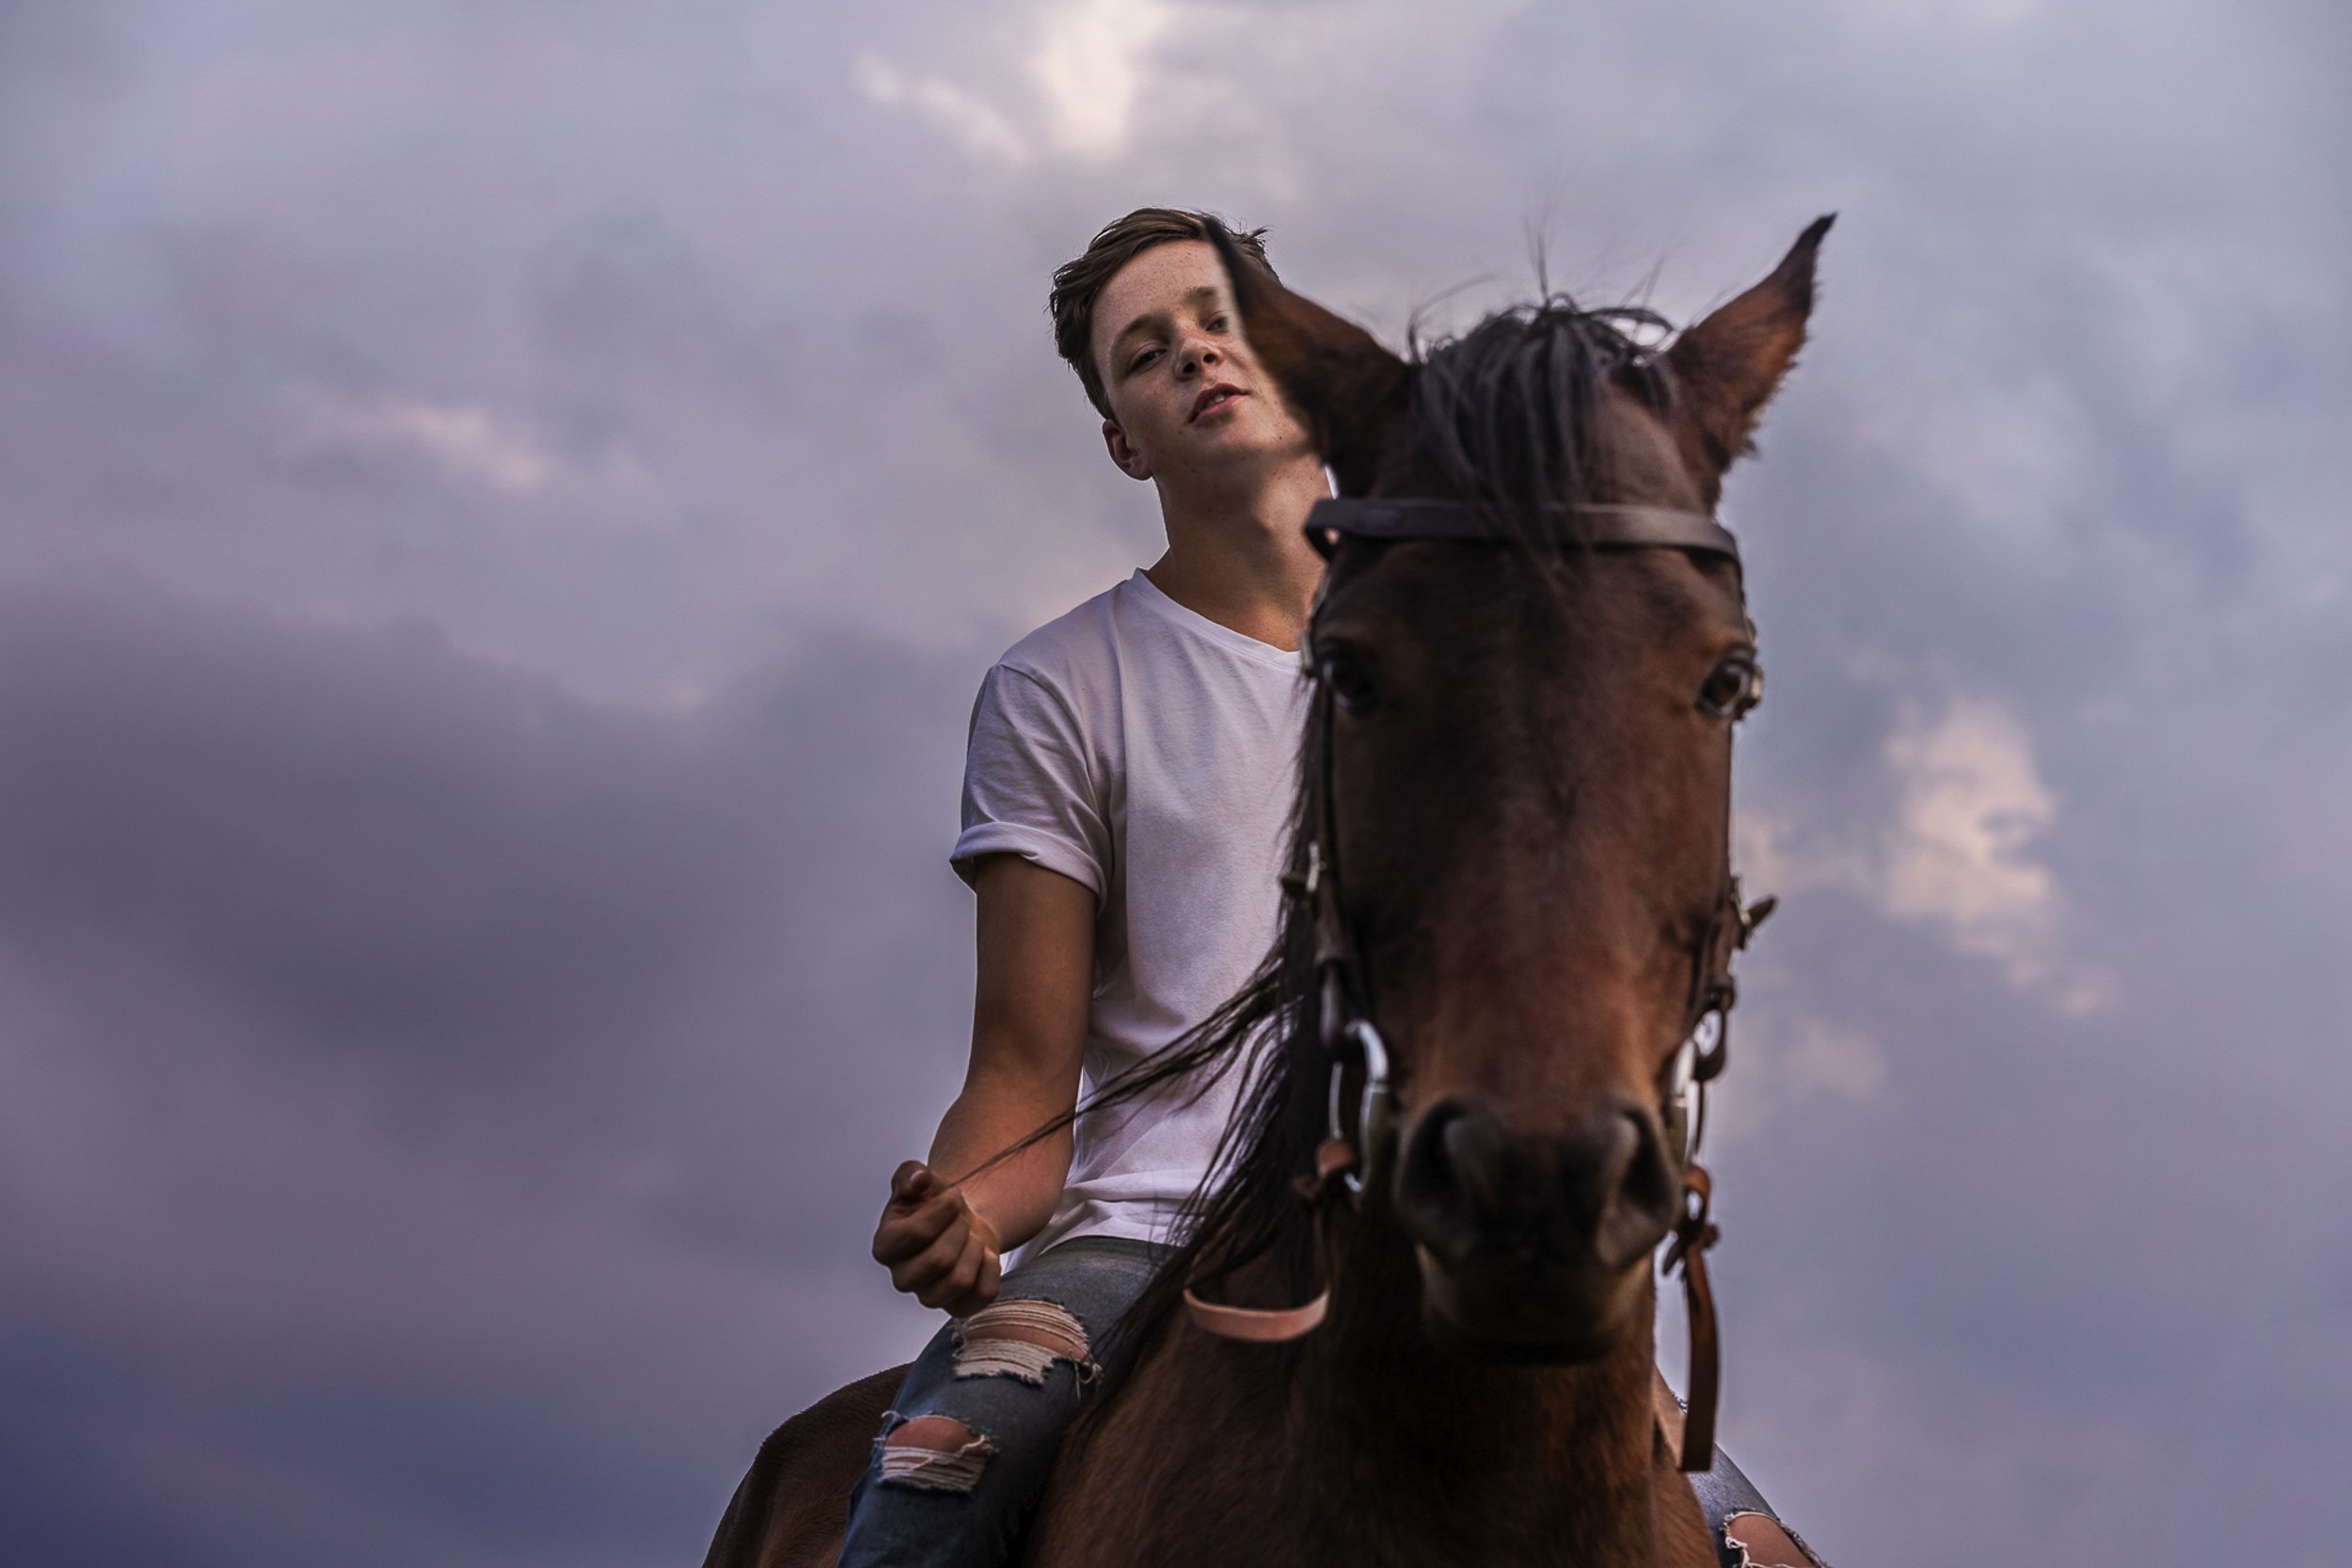 Young man on horse